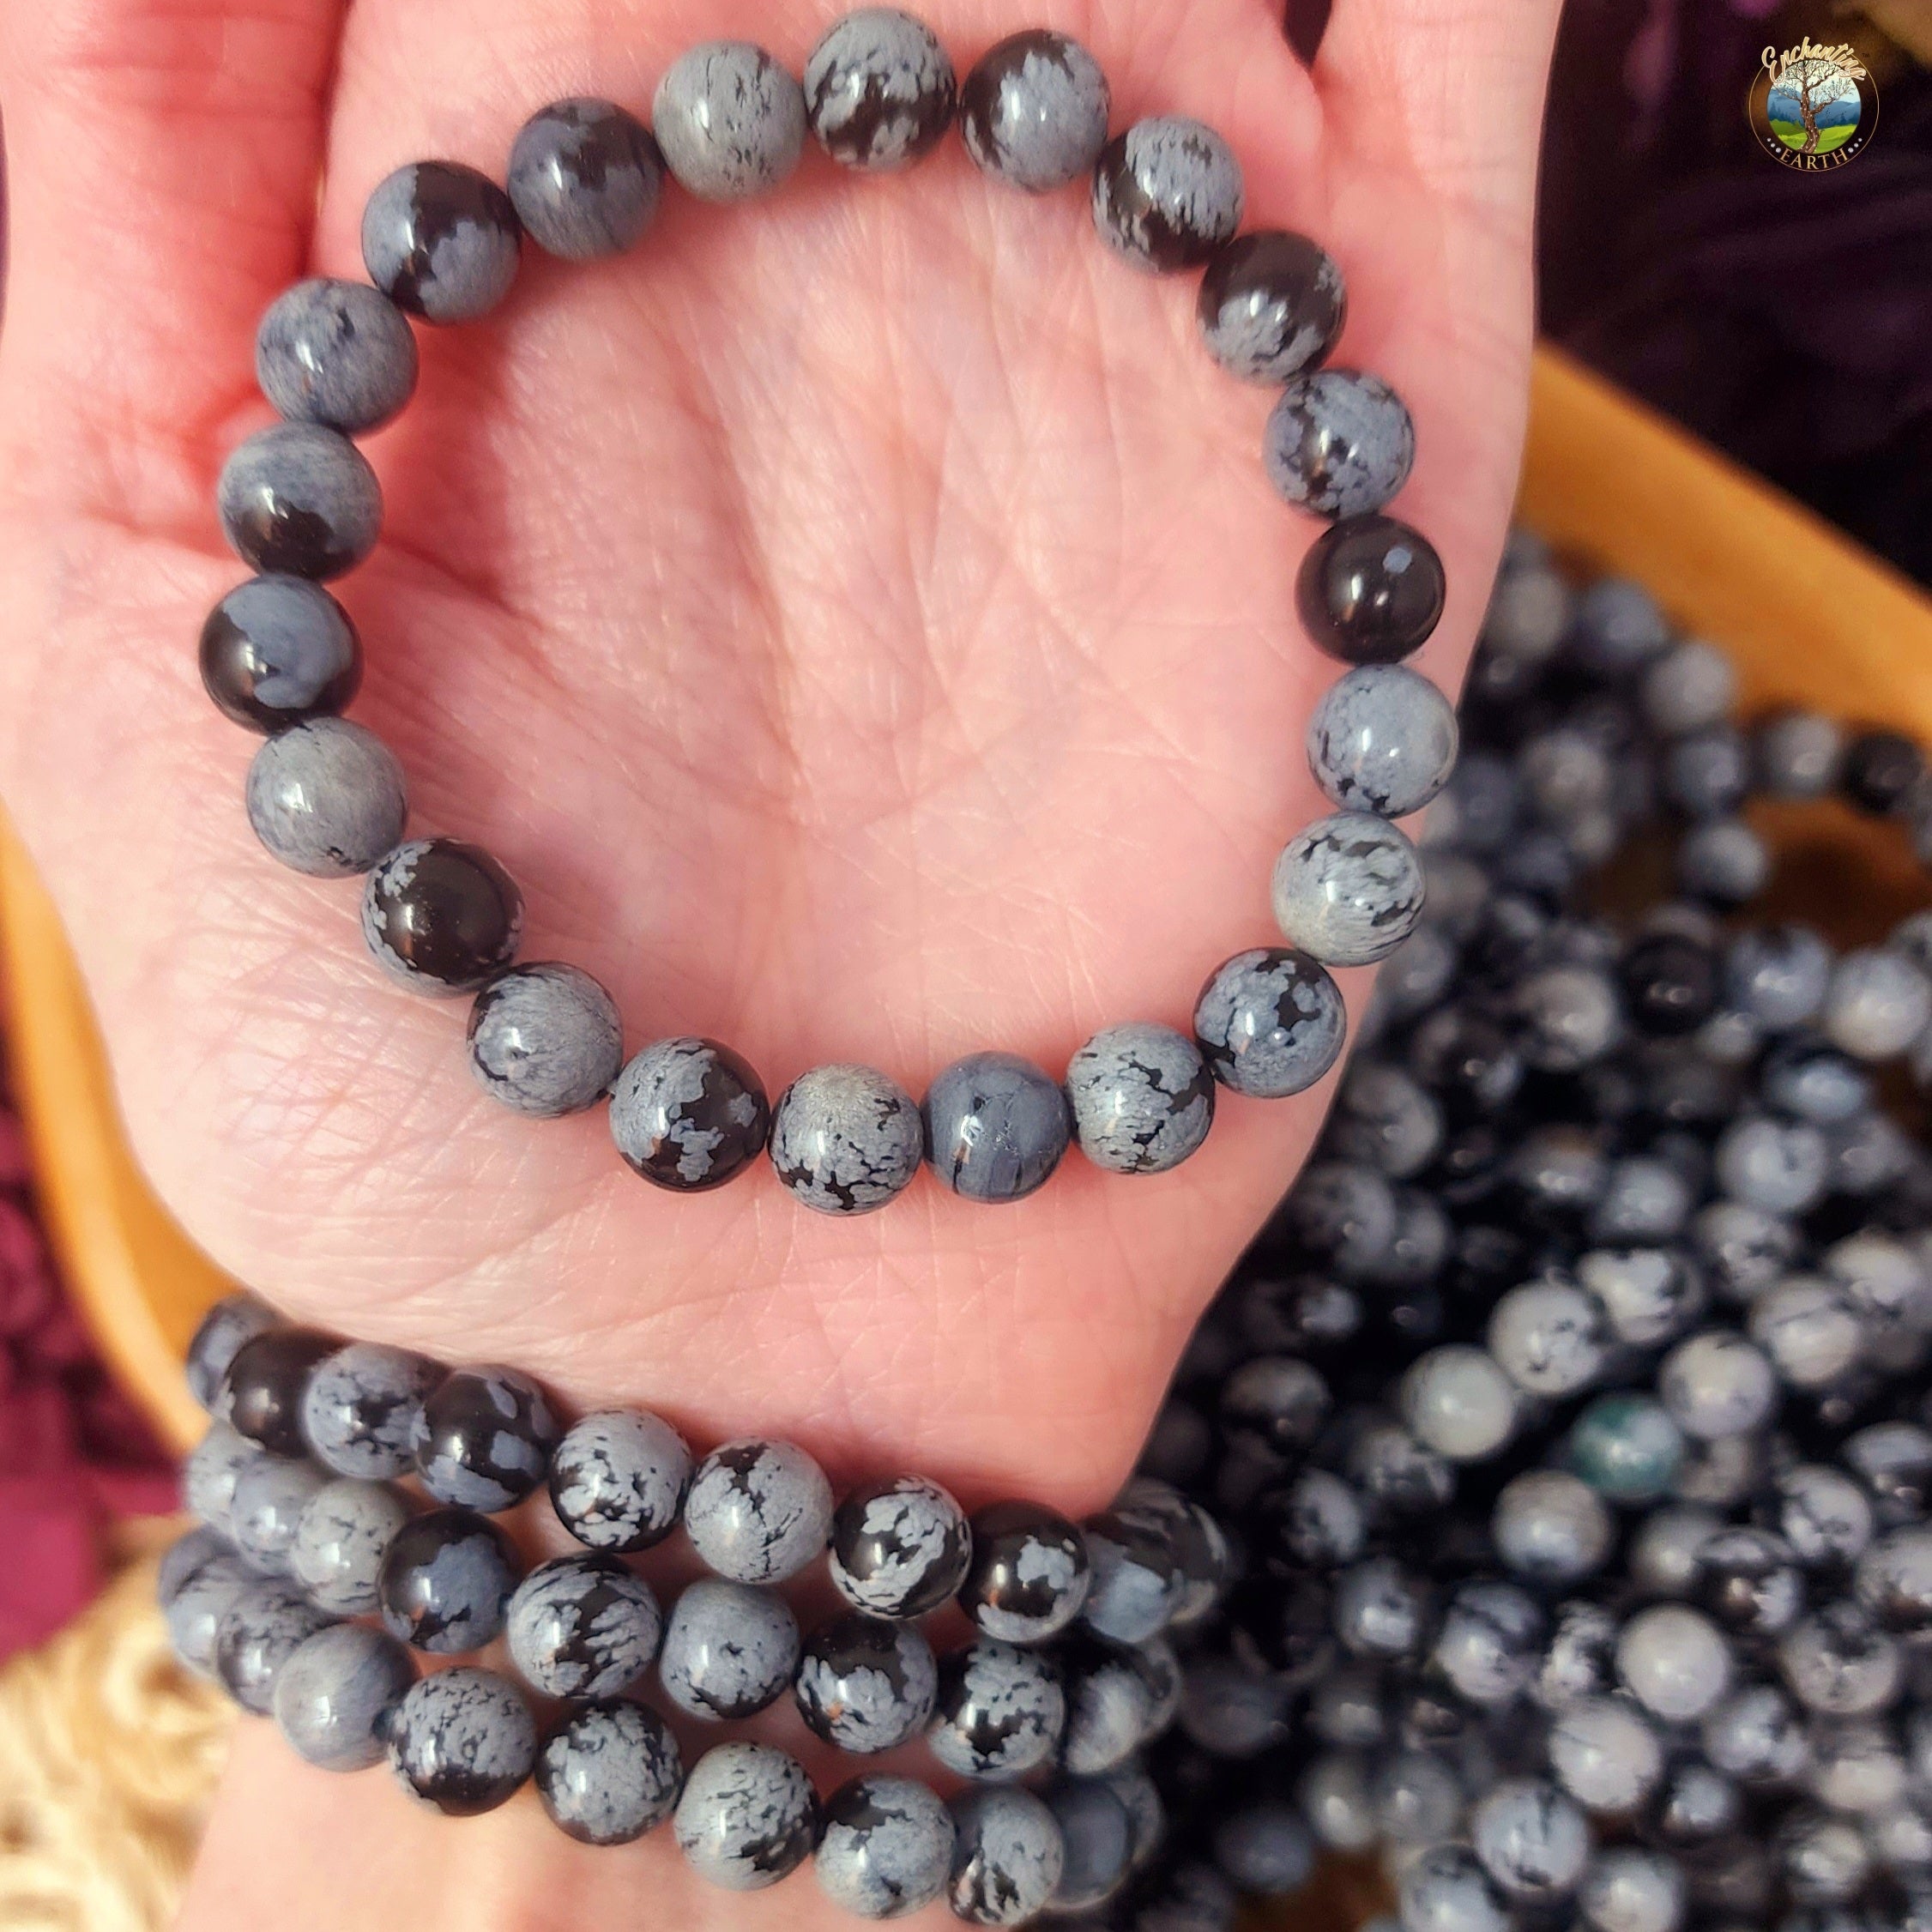 Snowflake Obsidian Bracelet for Insight, Protection and Transformation